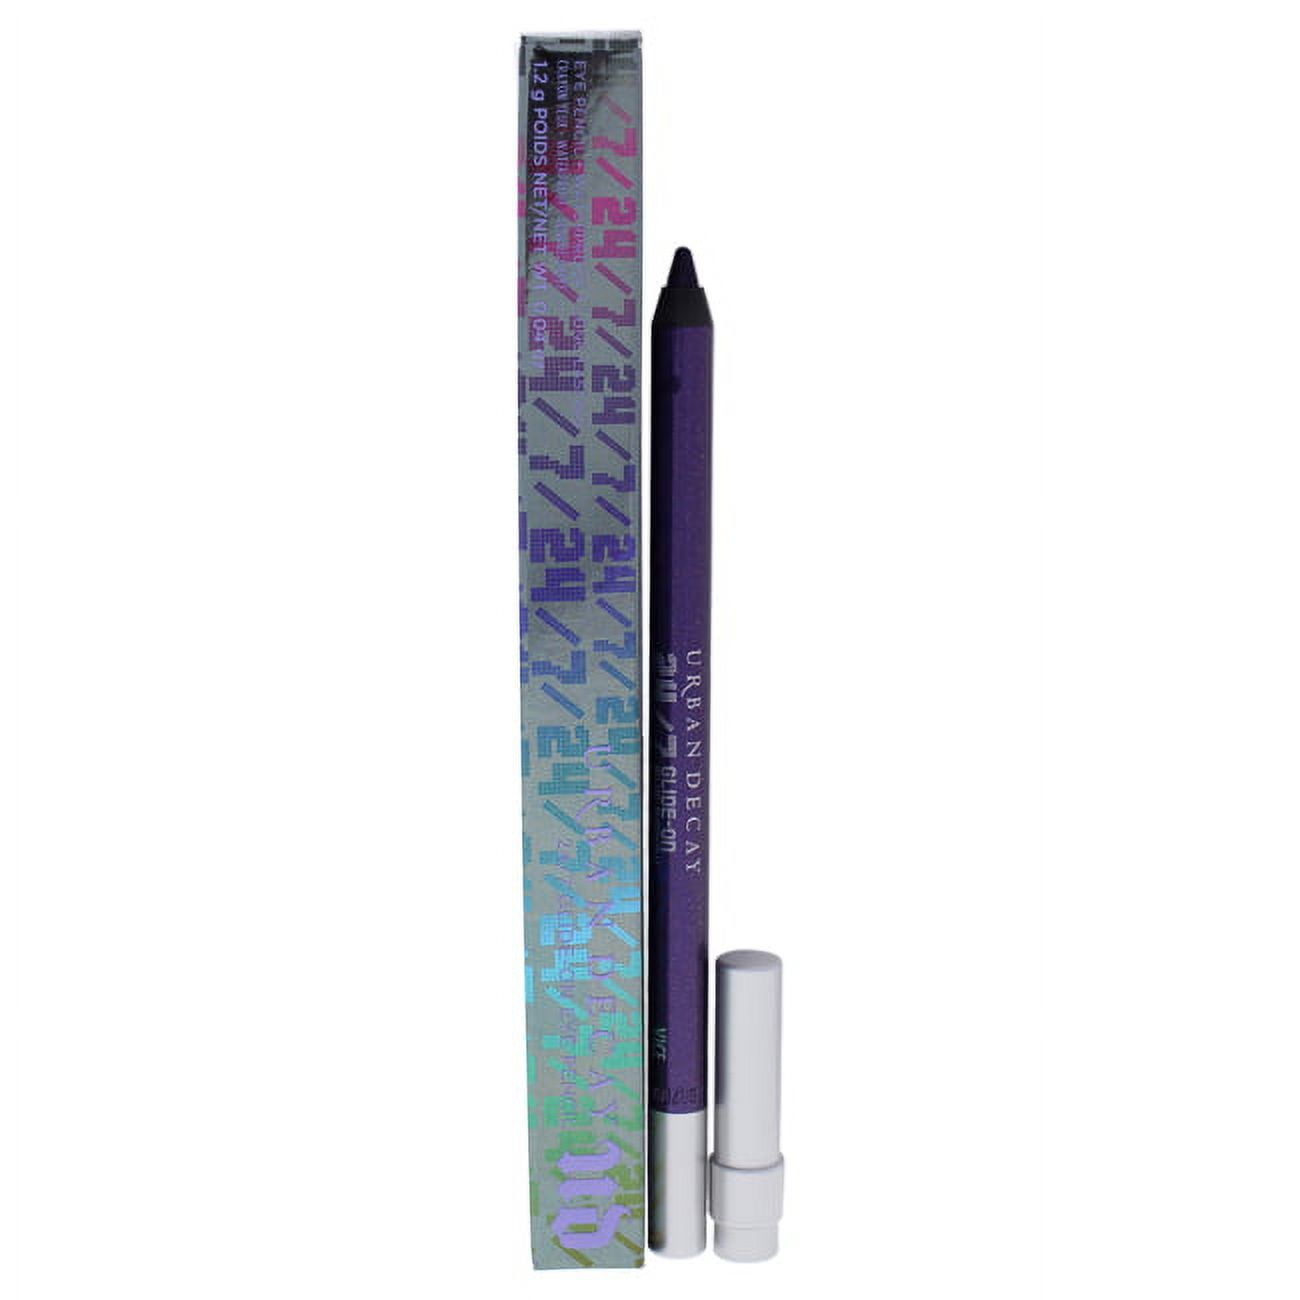 LOT of 2 VICE Urban Decay 24/7 Glide-On EyeLiner Pencil TOTAL SIZE:  .16g/0.06 oz